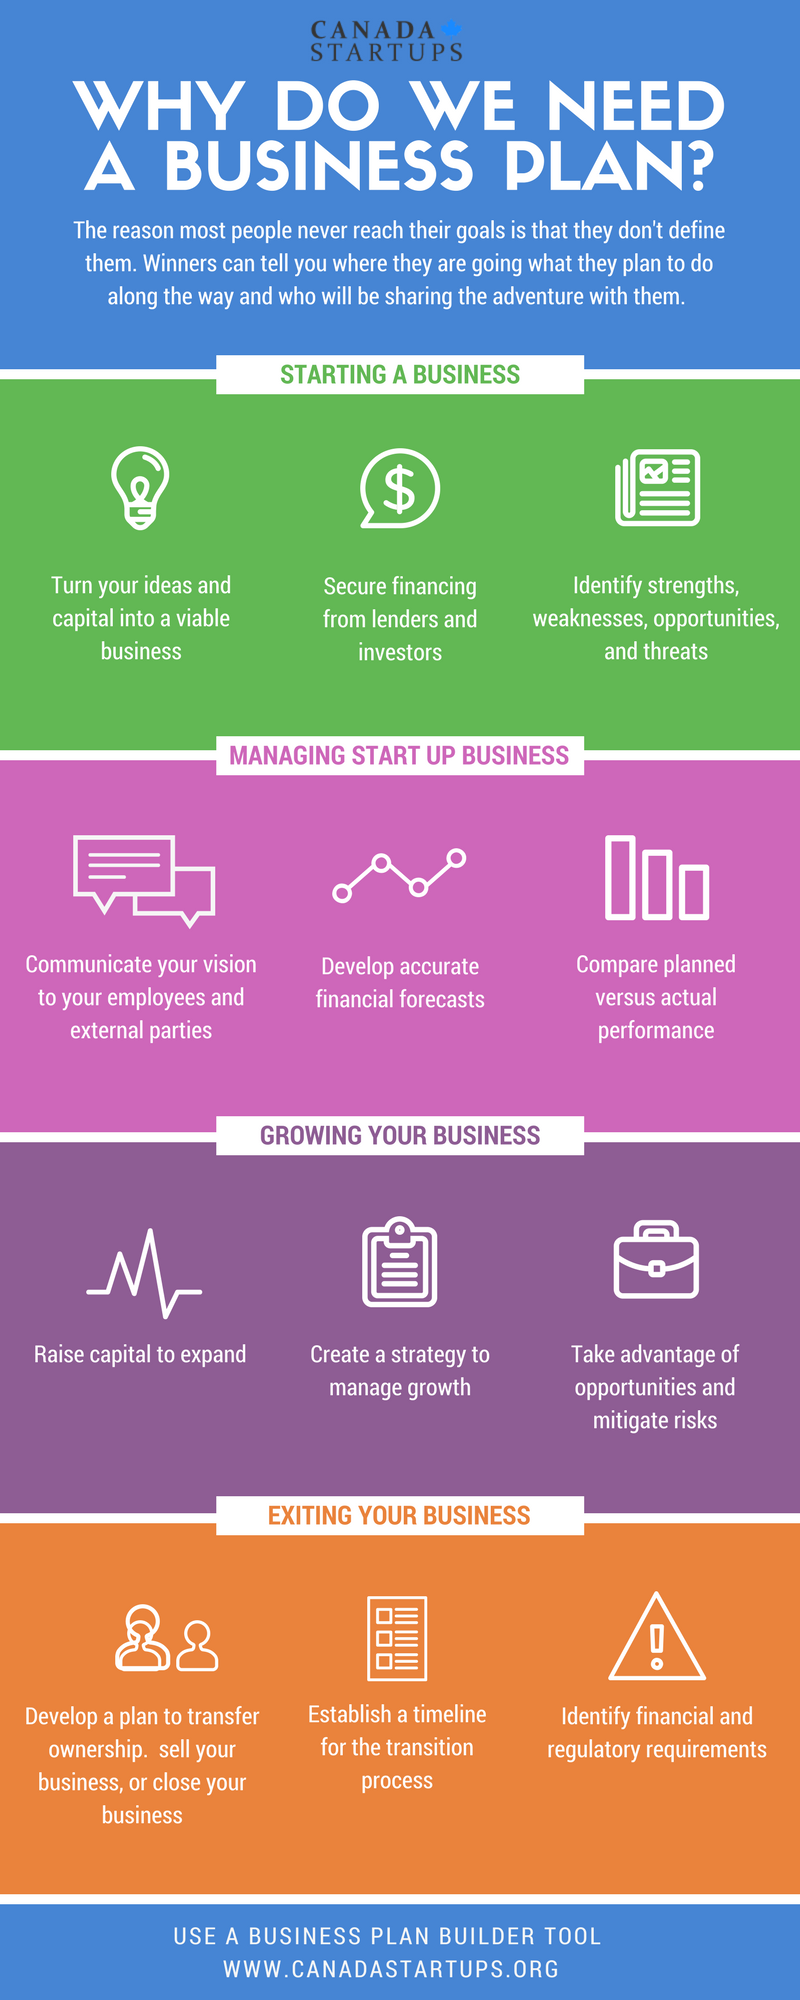 business plan for small business canada